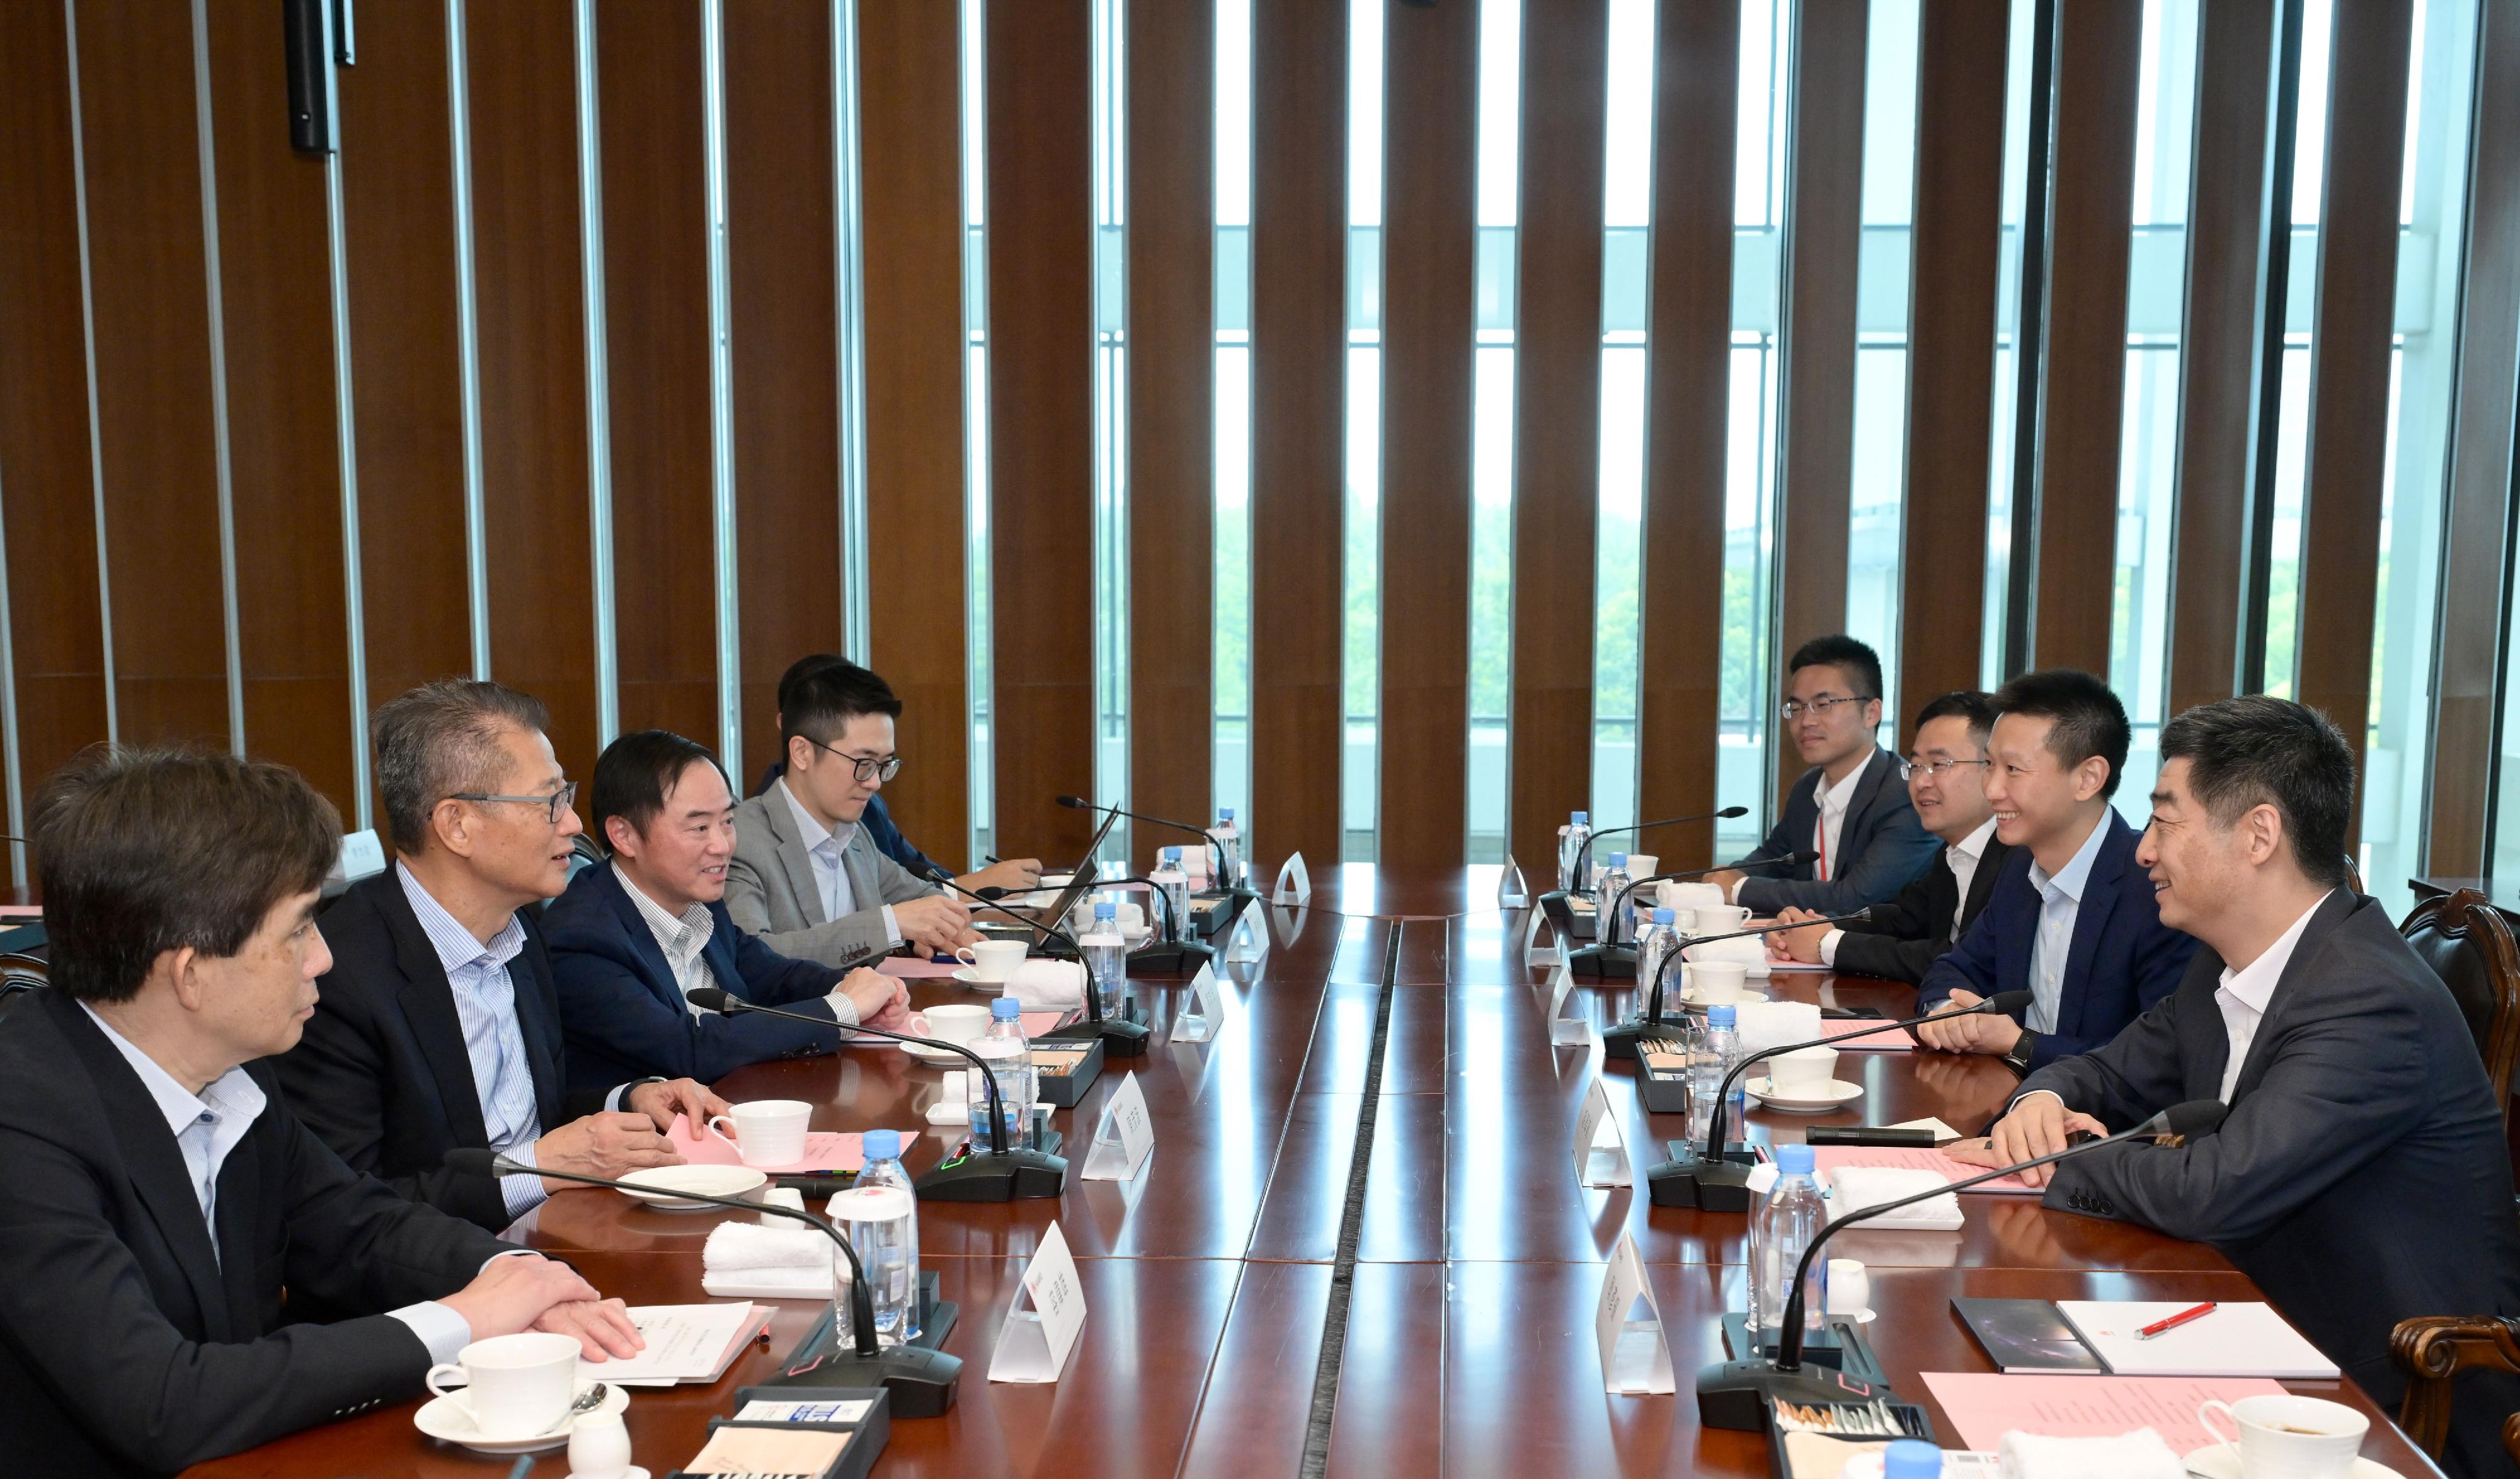 The Financial Secretary, Mr Paul Chan, started his visit programme in Shanghai today (July 5). Photo shows Mr Chan (second left); the Director-General of the Office for Attracting Strategic Enterprises, Mr Philip Yung (first left); and the Government Chief Information Officer, Mr Tony Wong (third left), meeting with Deputy Chairman of the Board and Rotating Chairman of Huawei Mr Hu Houkun (first right).